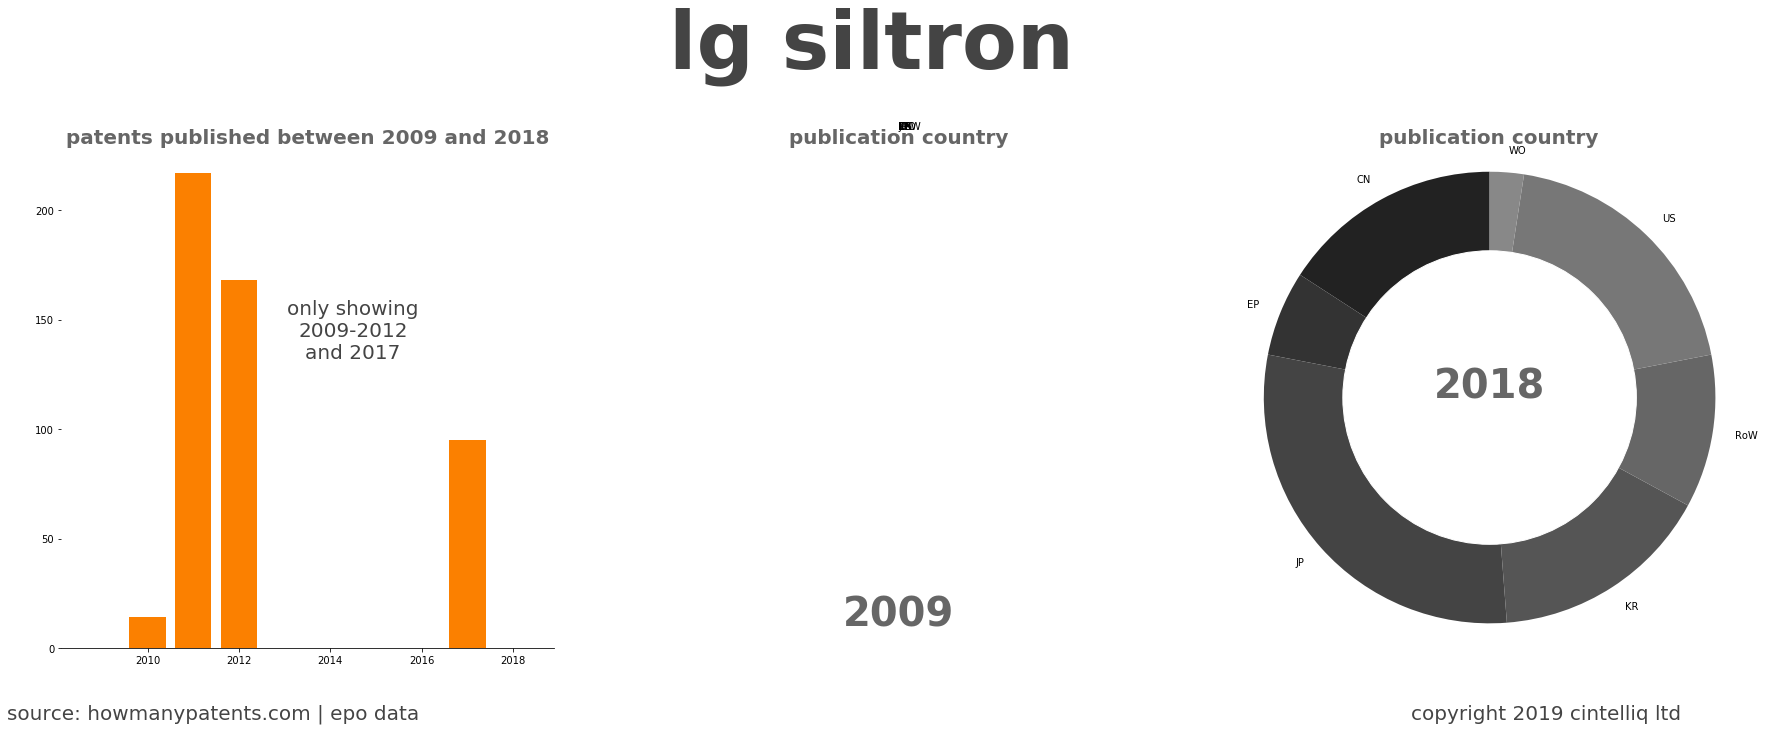 summary of patents for Lg Siltron